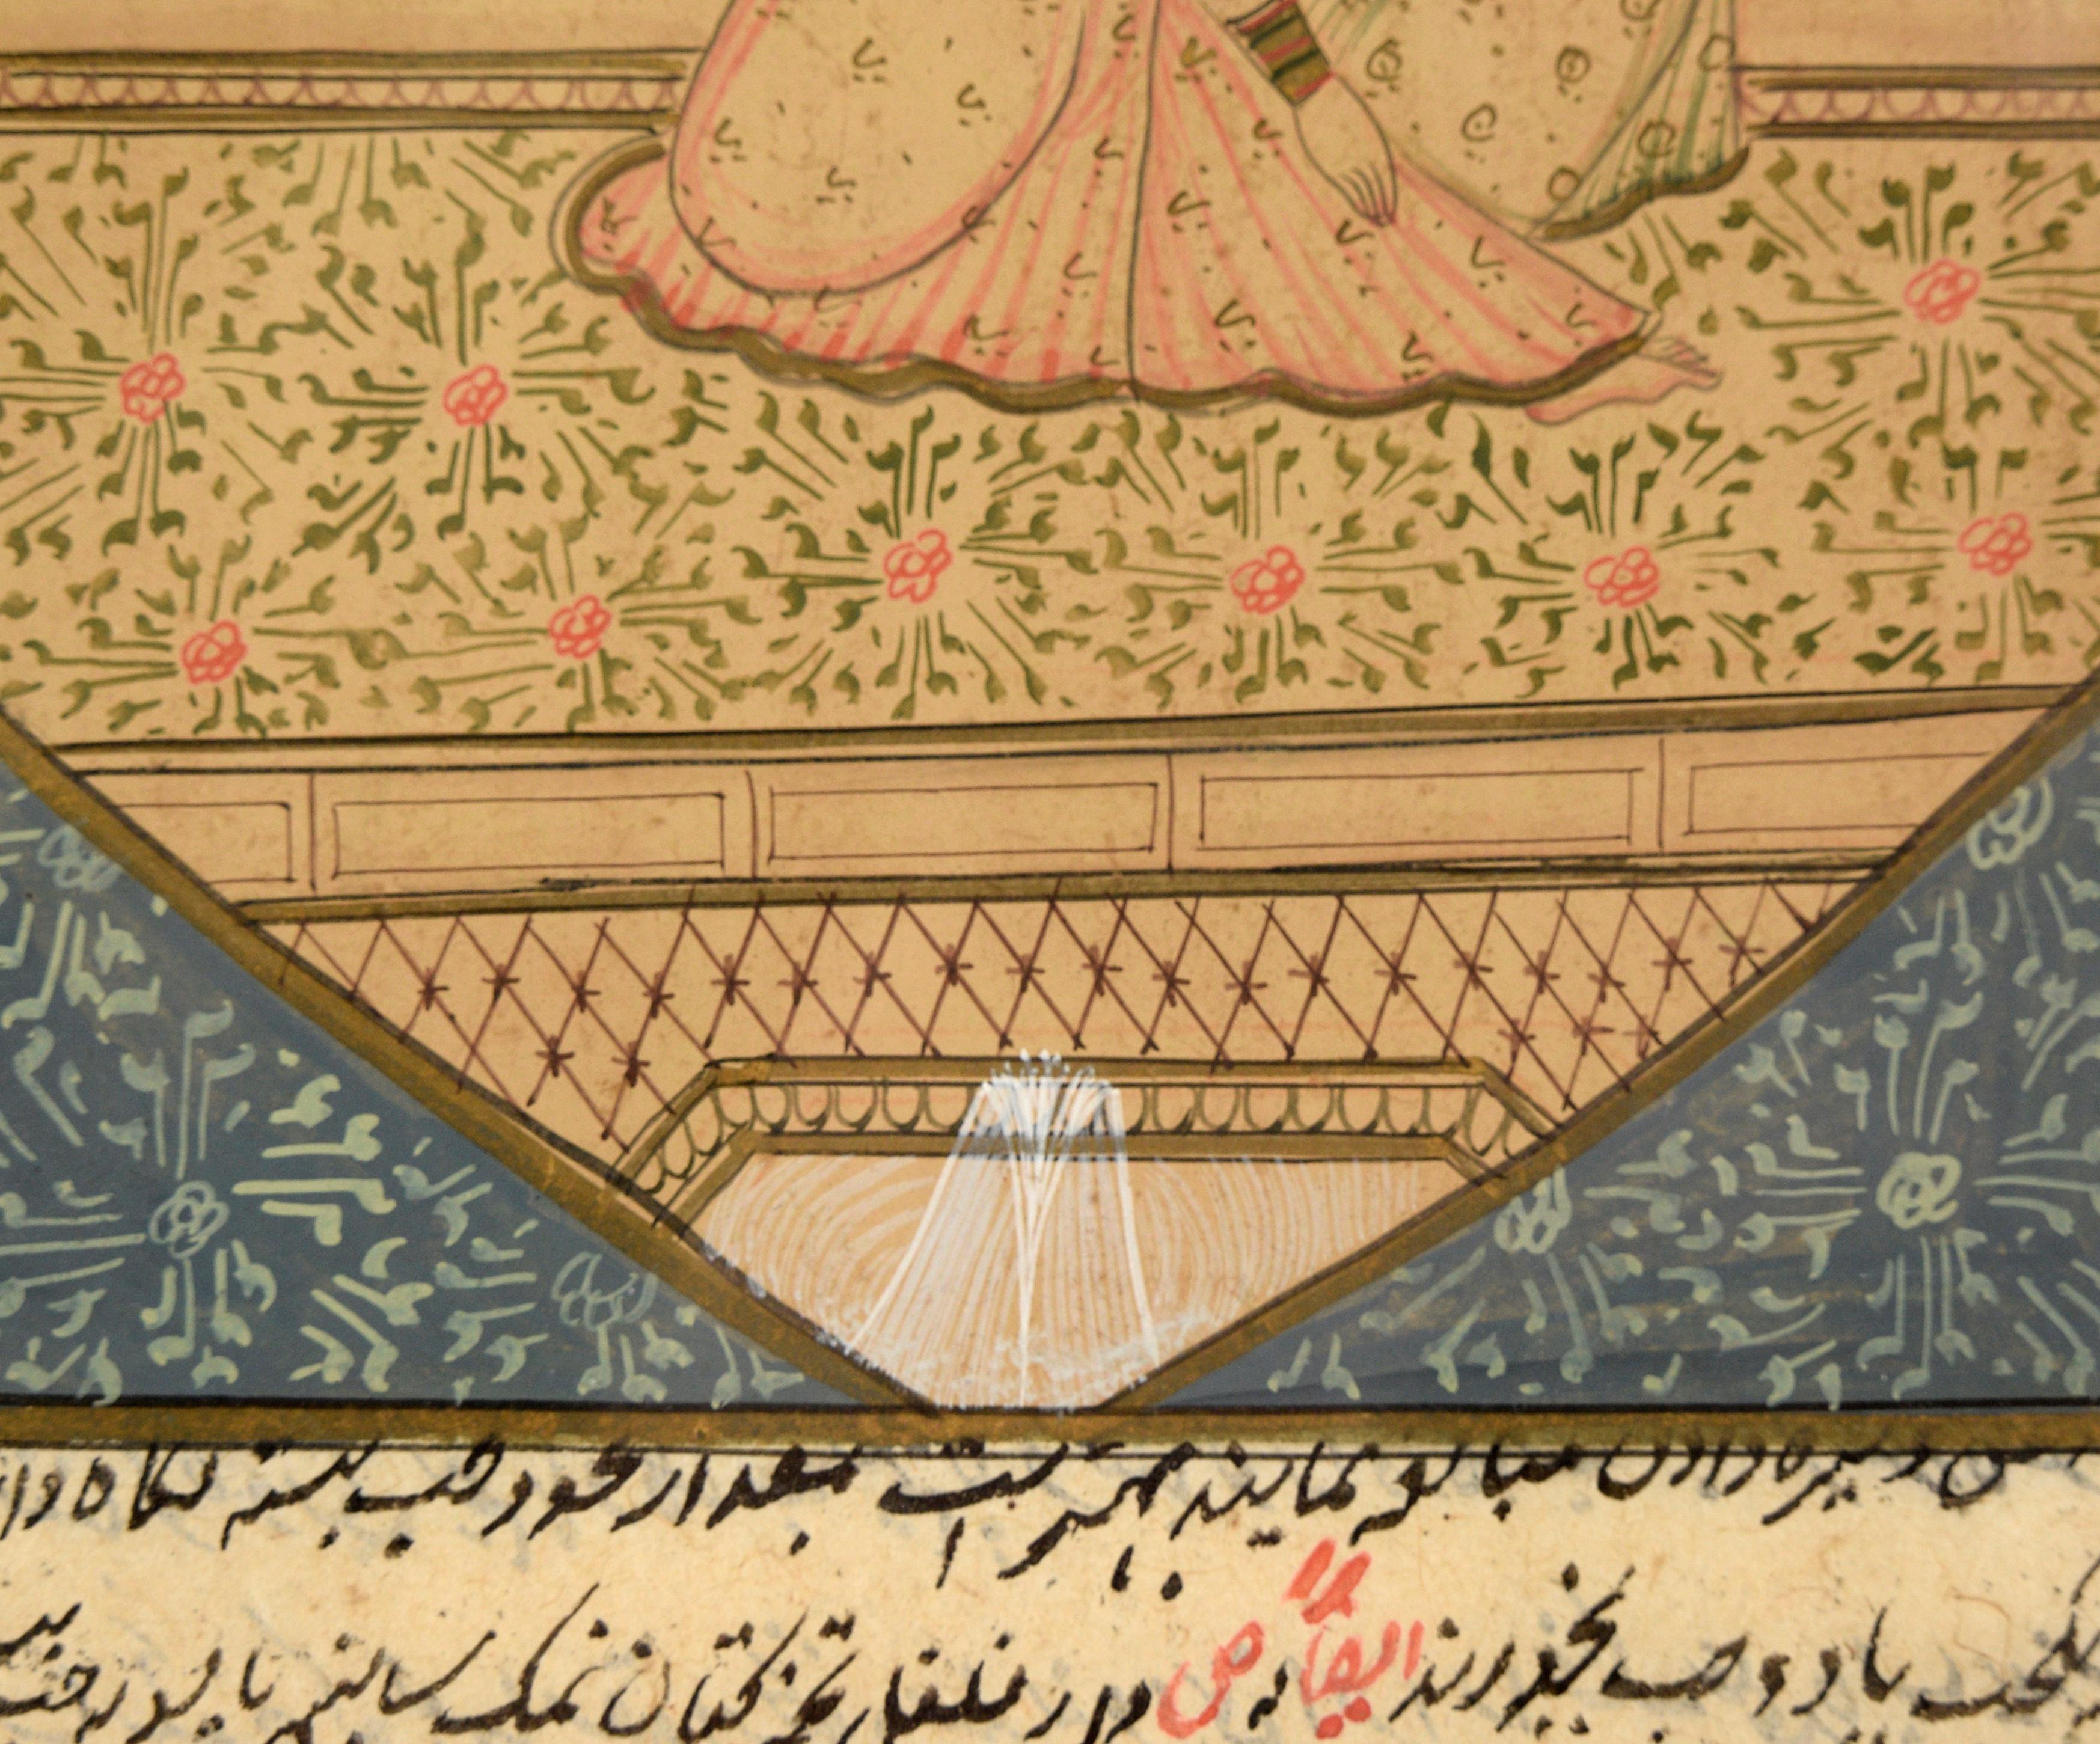 18th Century Persian Manuscript Page, Illustrated in the Safavid Style